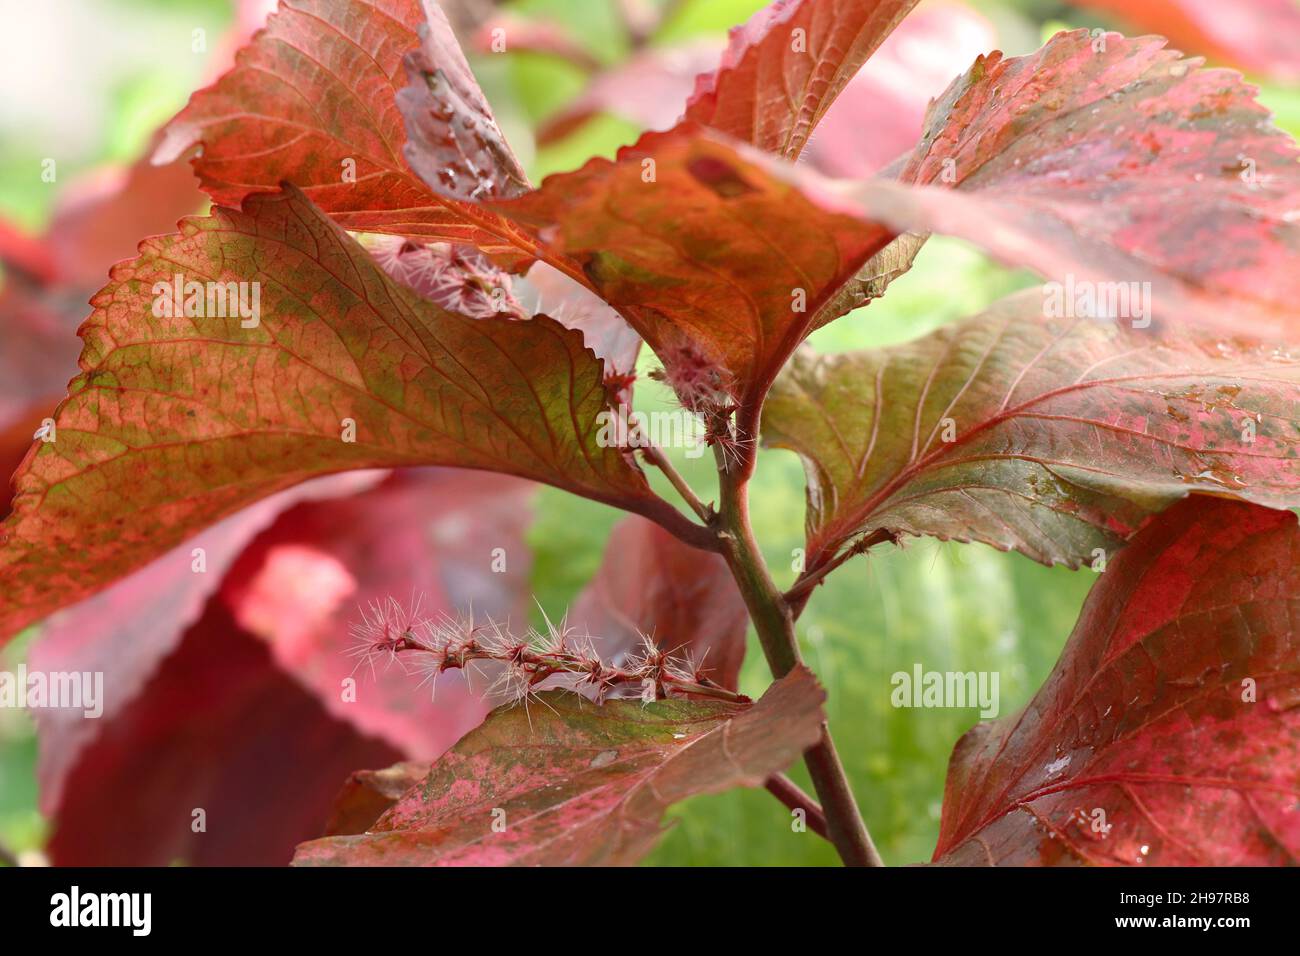 Leaves with the bloom of Acalypha wilkesiana Stock Photo